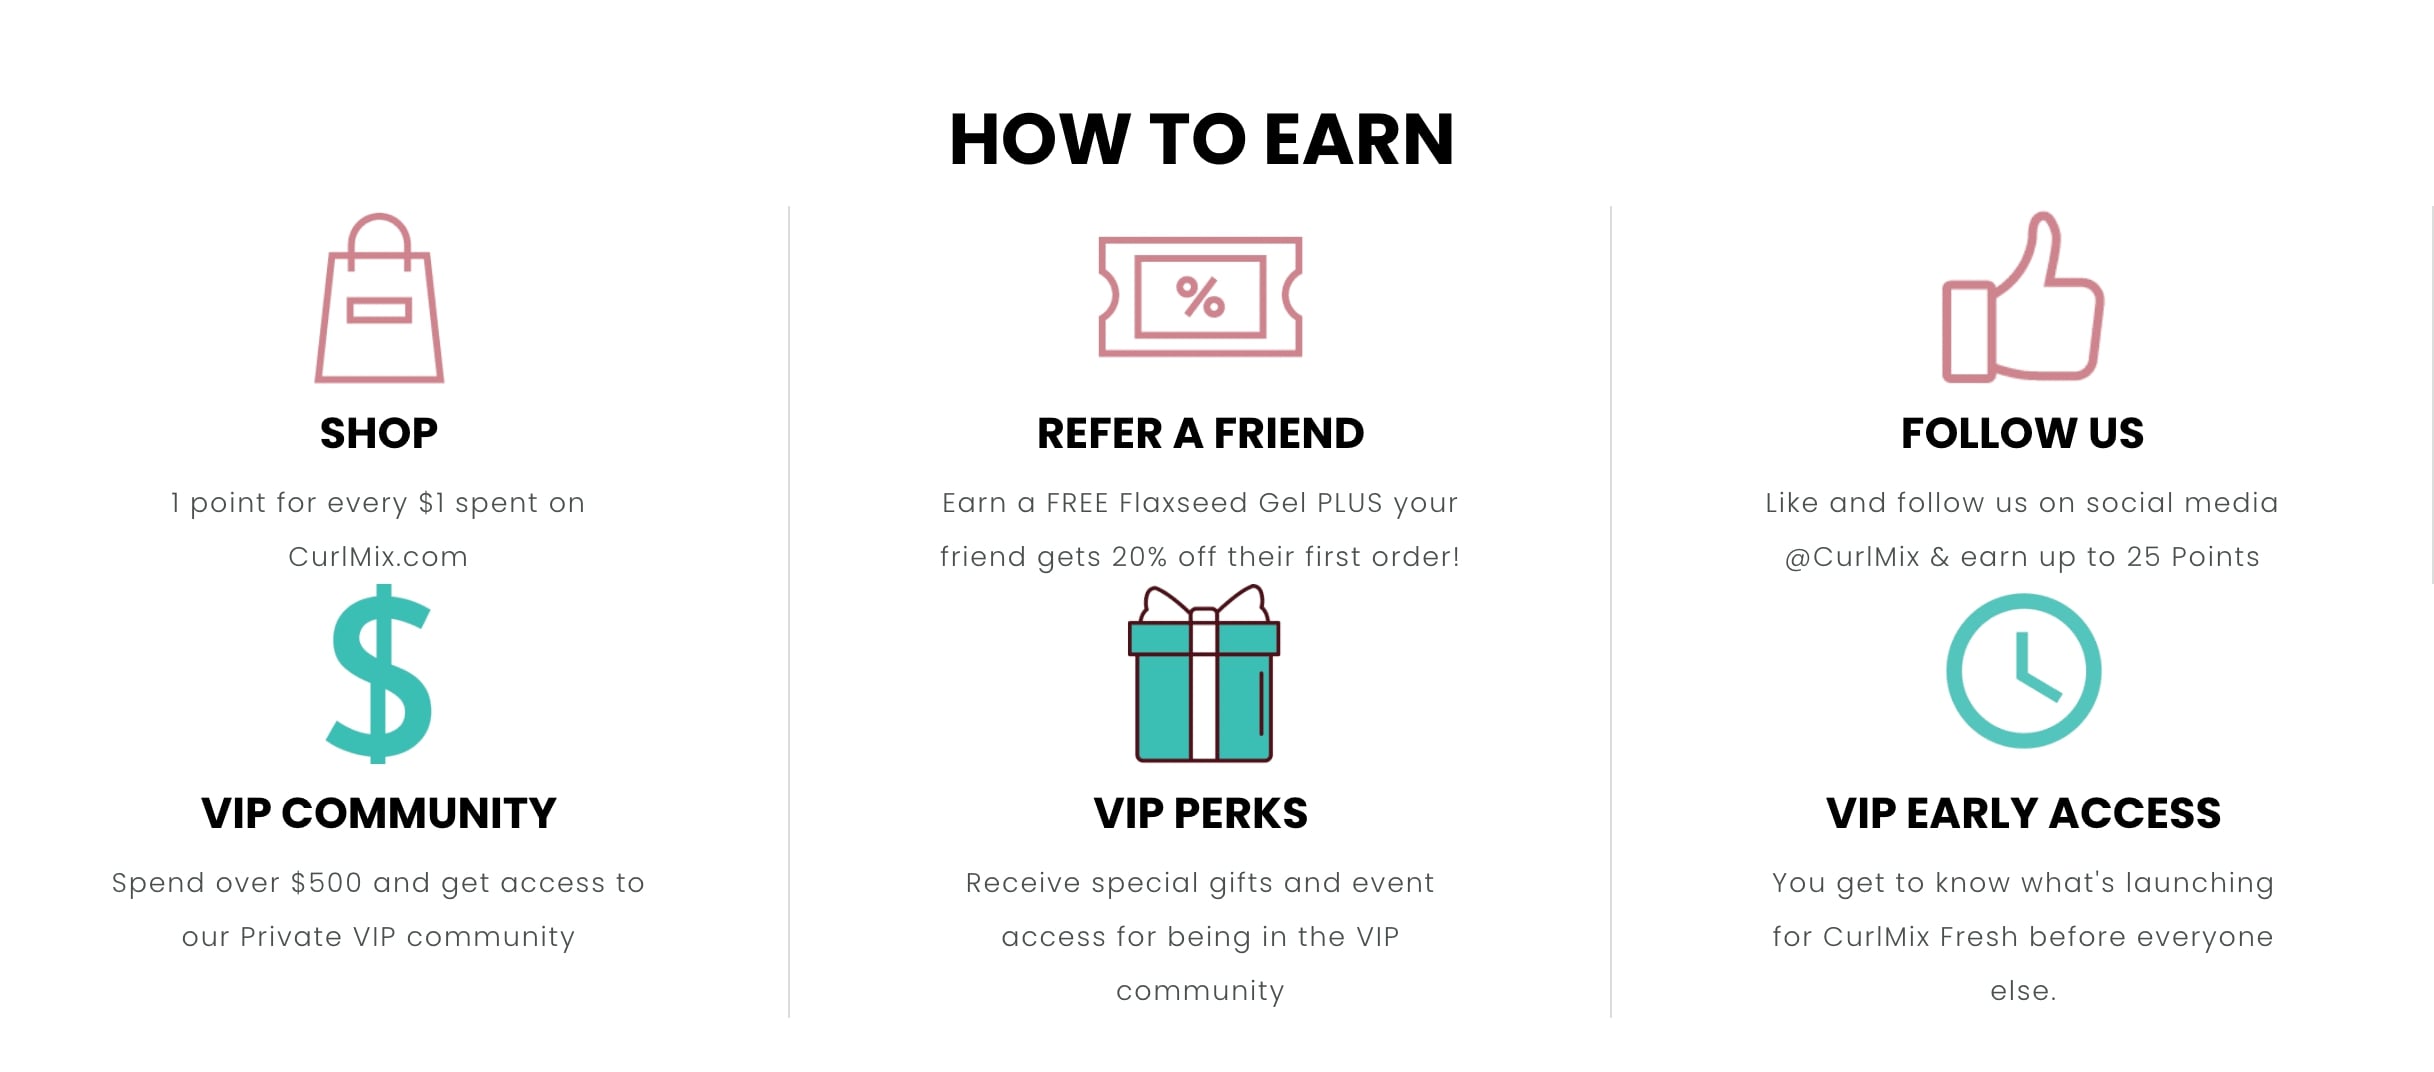 Screenshot of Curlmixs loyalty program information on how to earn points